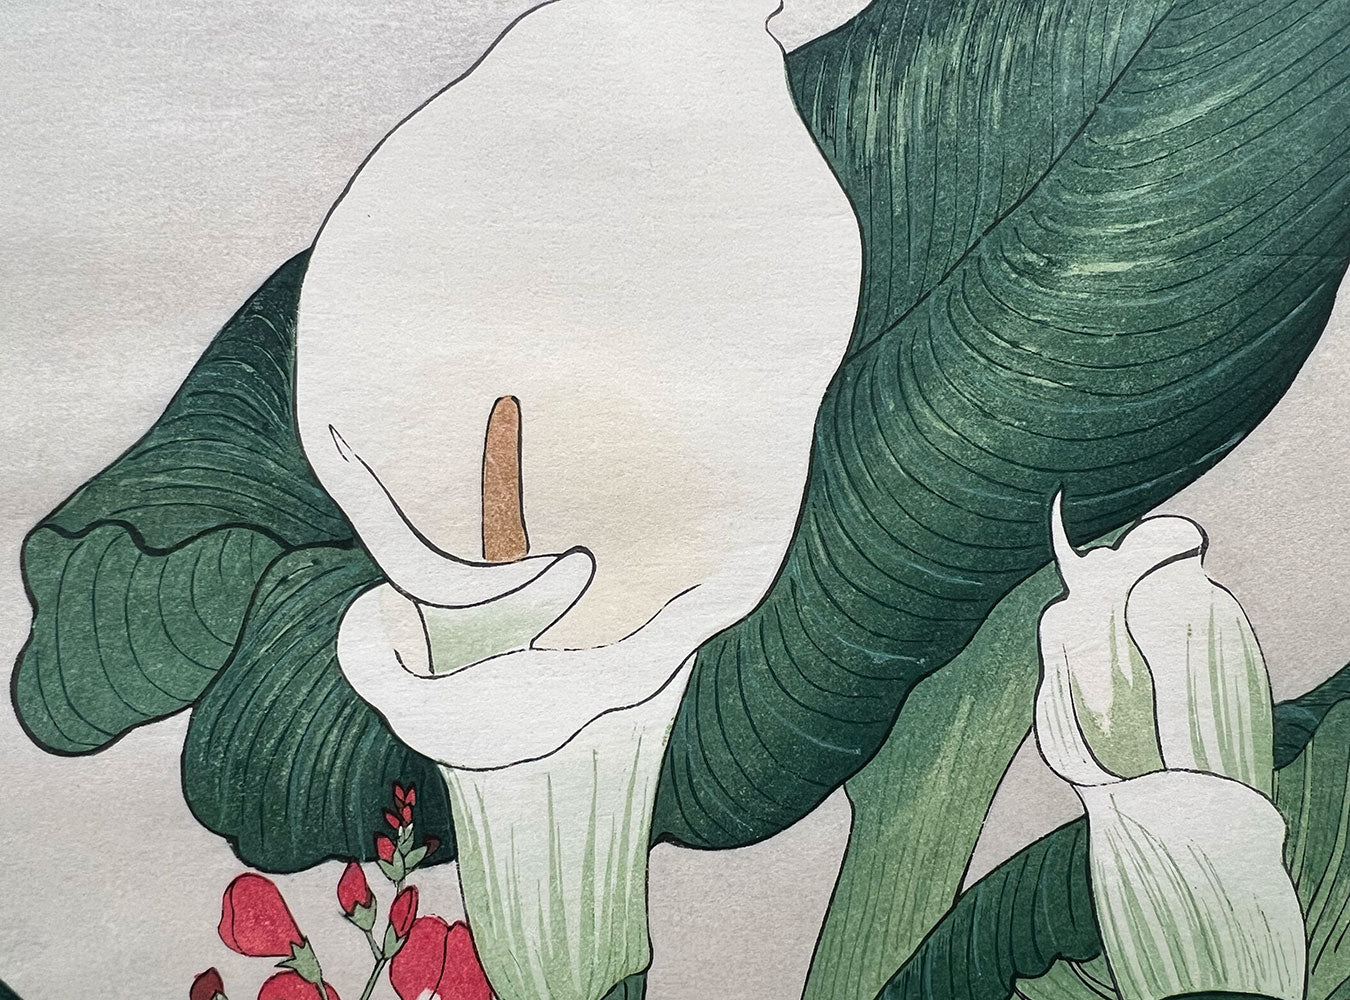 Woodblock print "Calla lily" by Tanigami Konan published by UNSODO